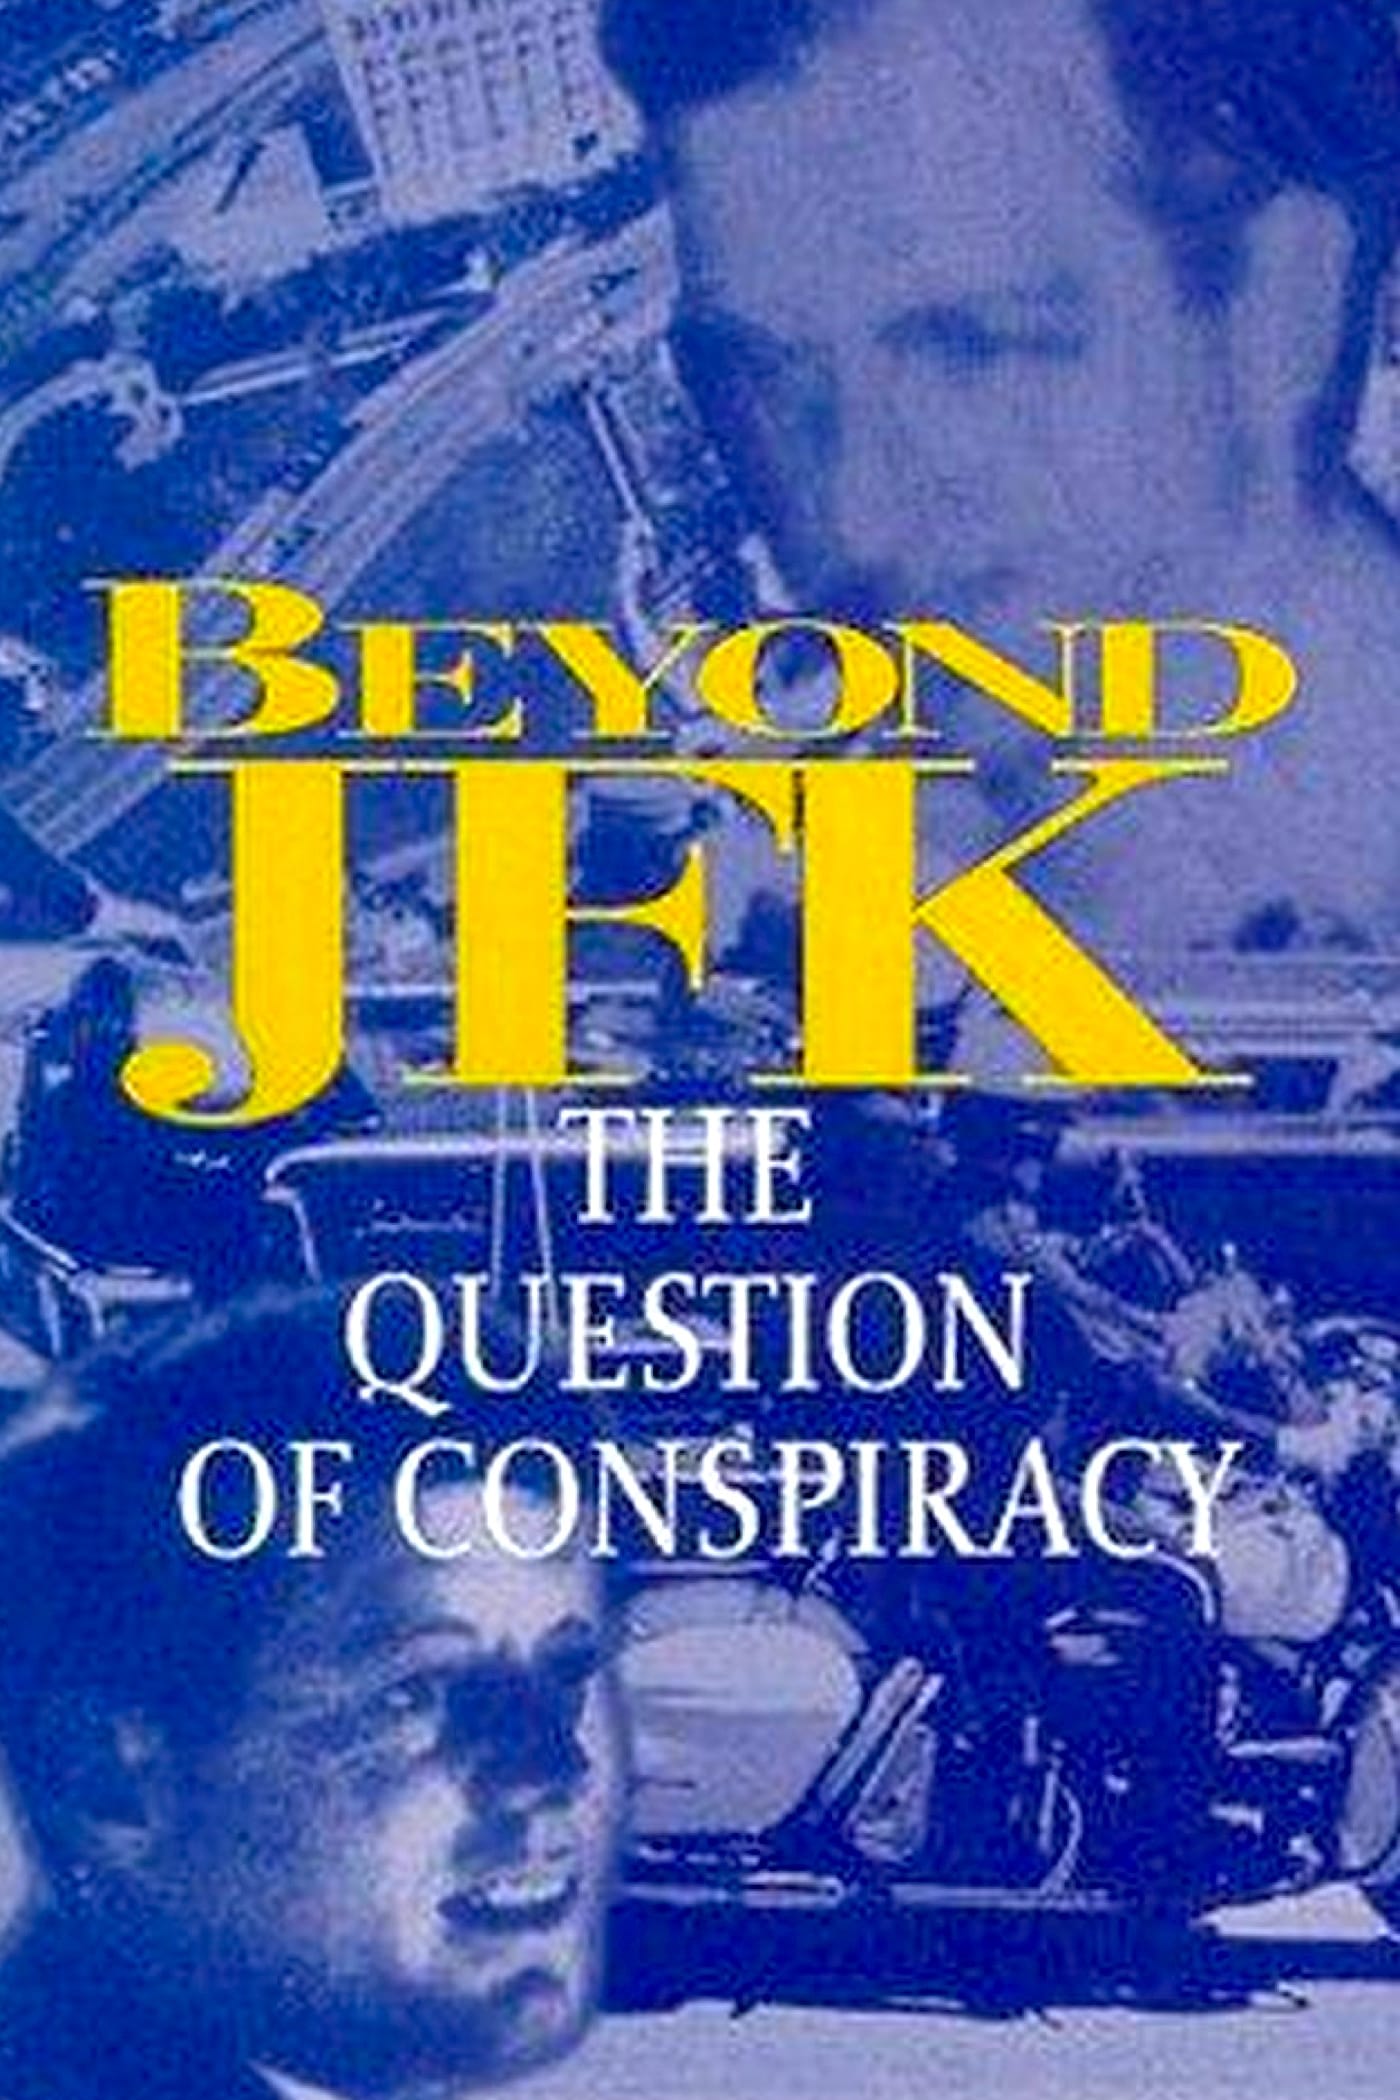 Beyond JFK: The Question of Conspiracy